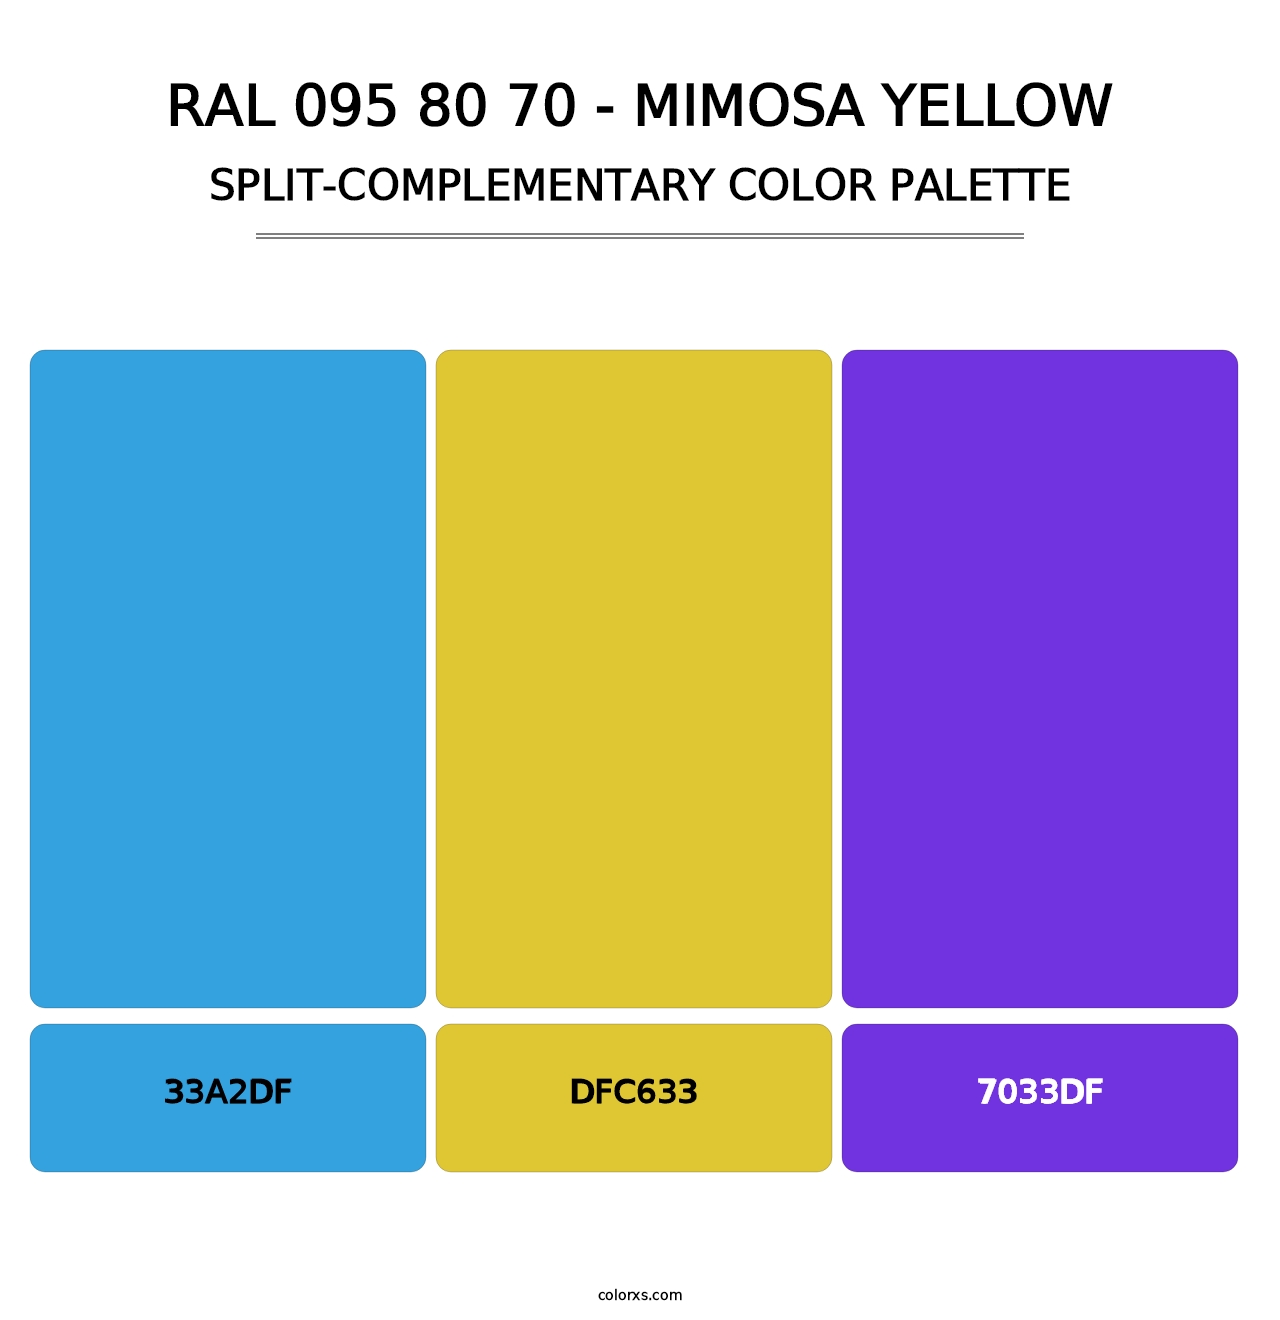 RAL 095 80 70 - Mimosa Yellow - Split-Complementary Color Palette